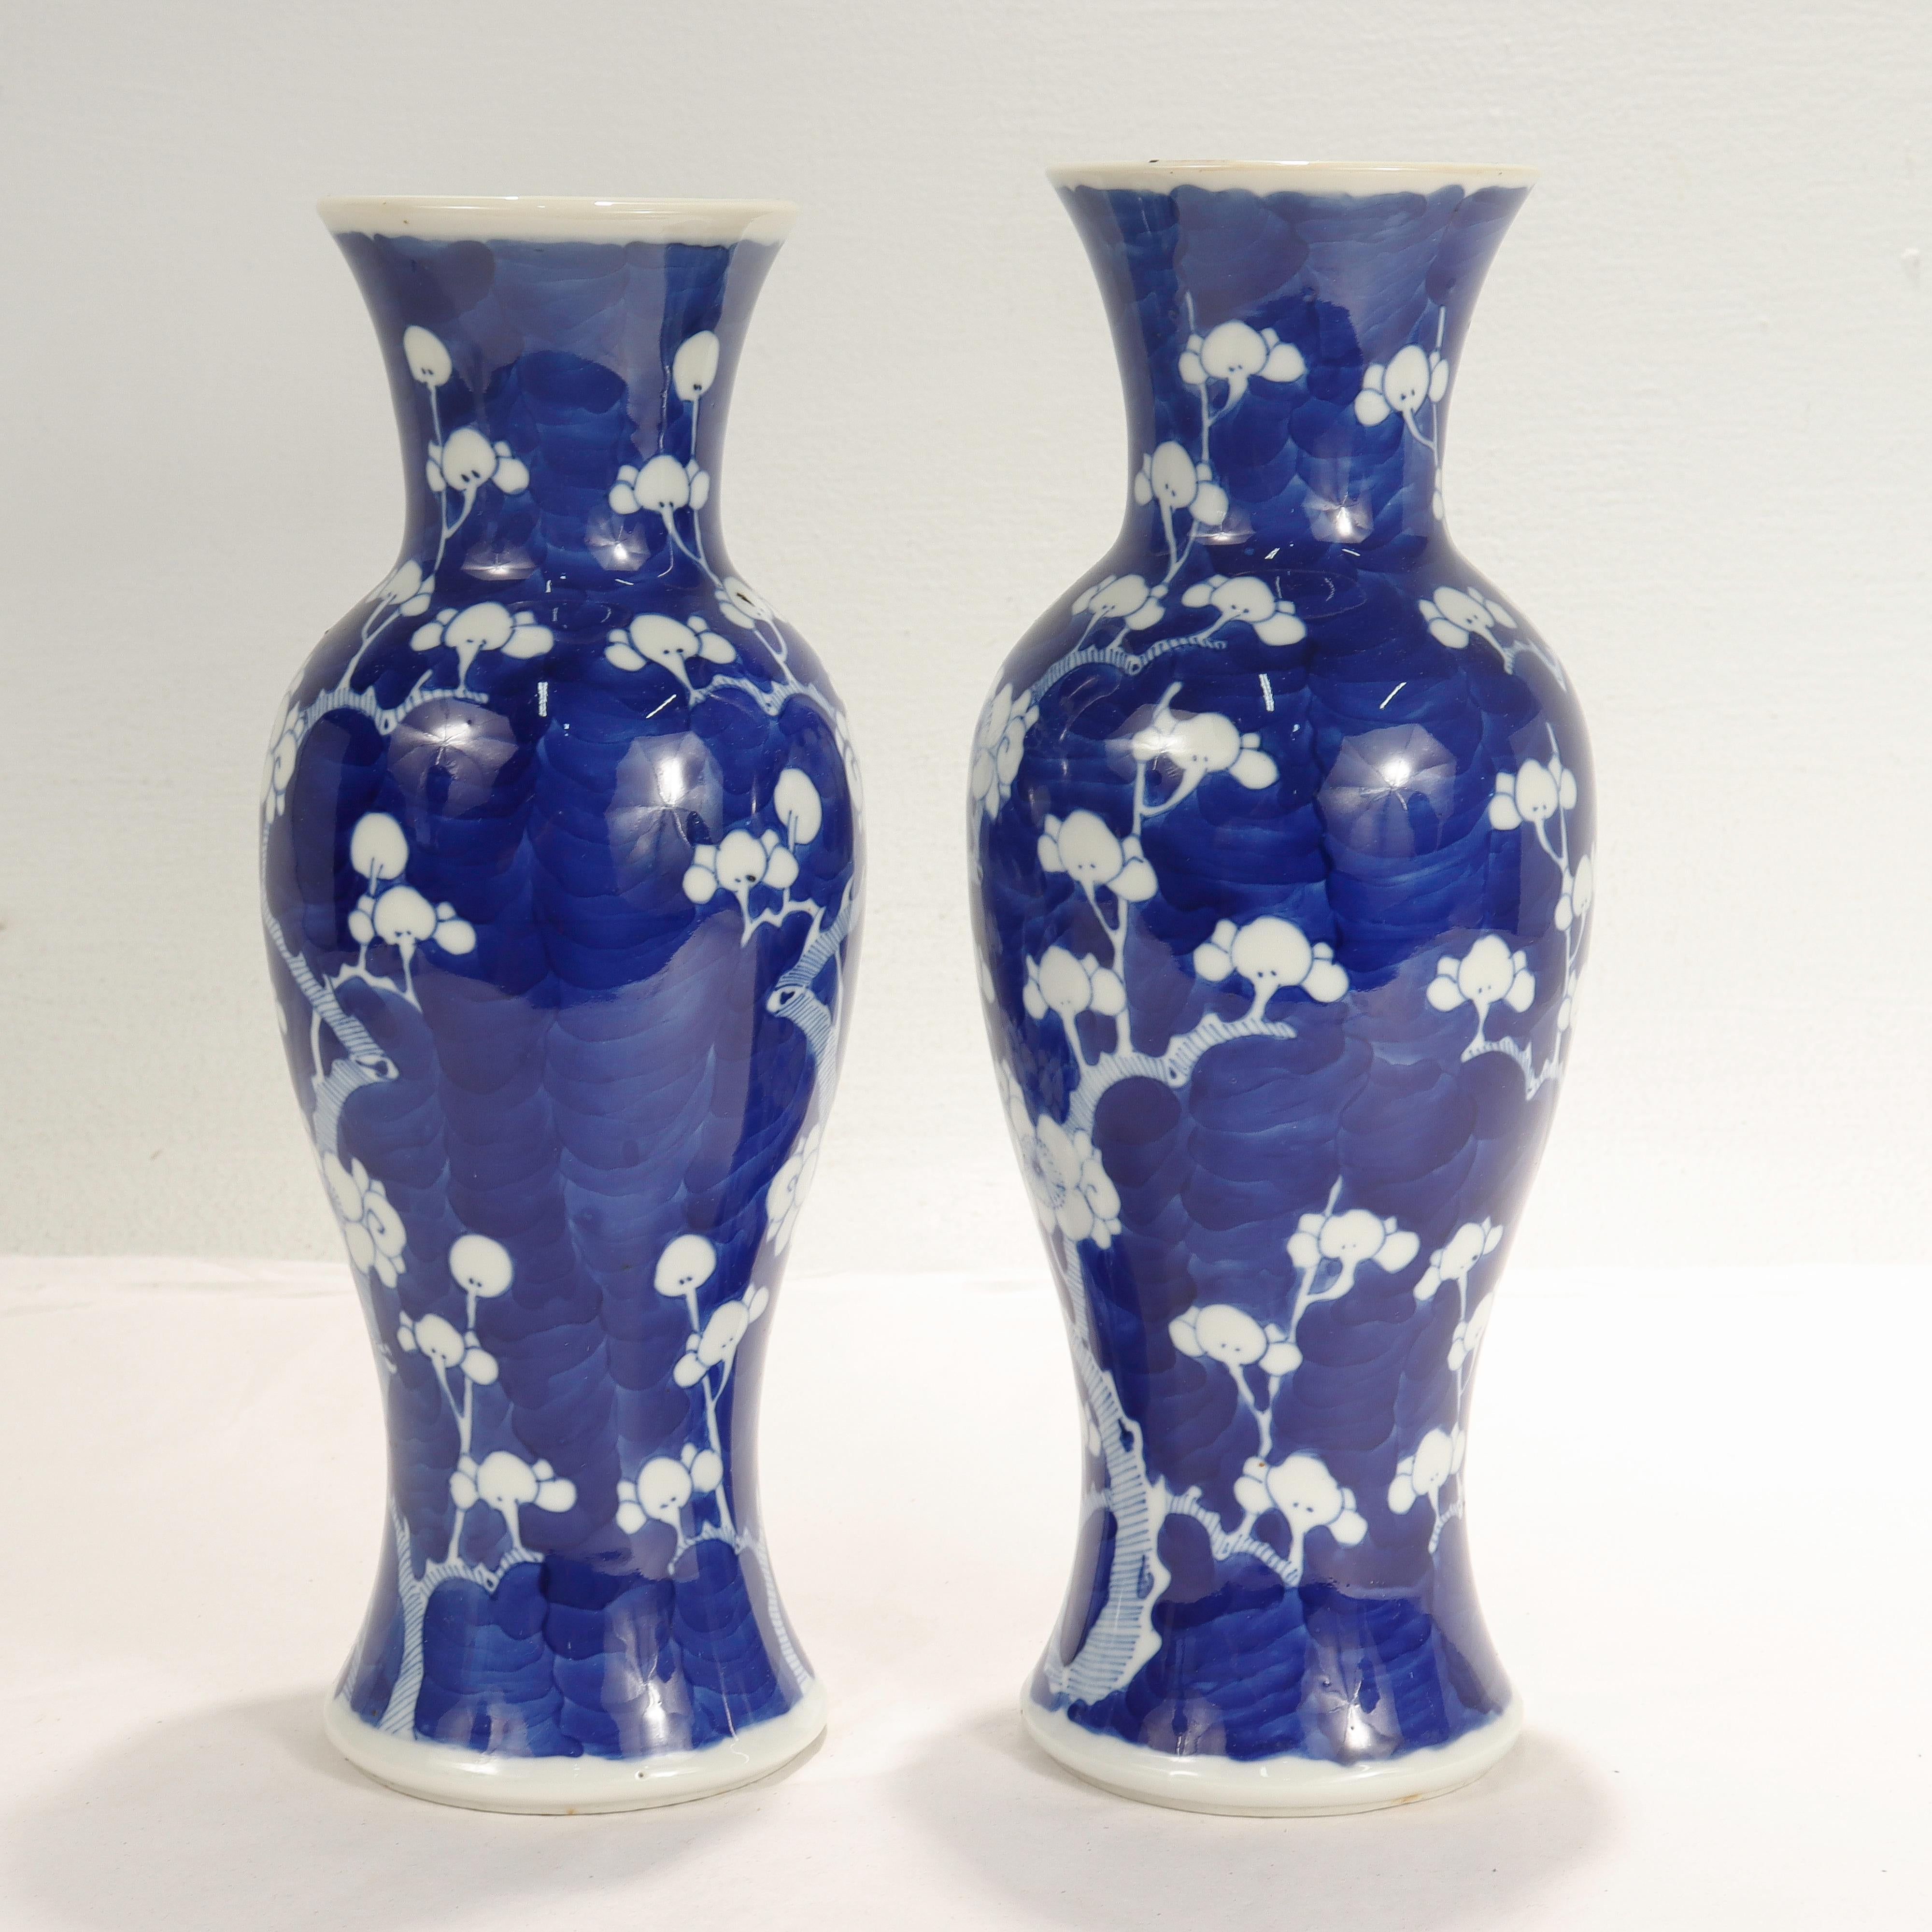 Chinese Export Pair of Old or Antique Chinese Baluster Form Prunus or Hawthorne Pattern Vases